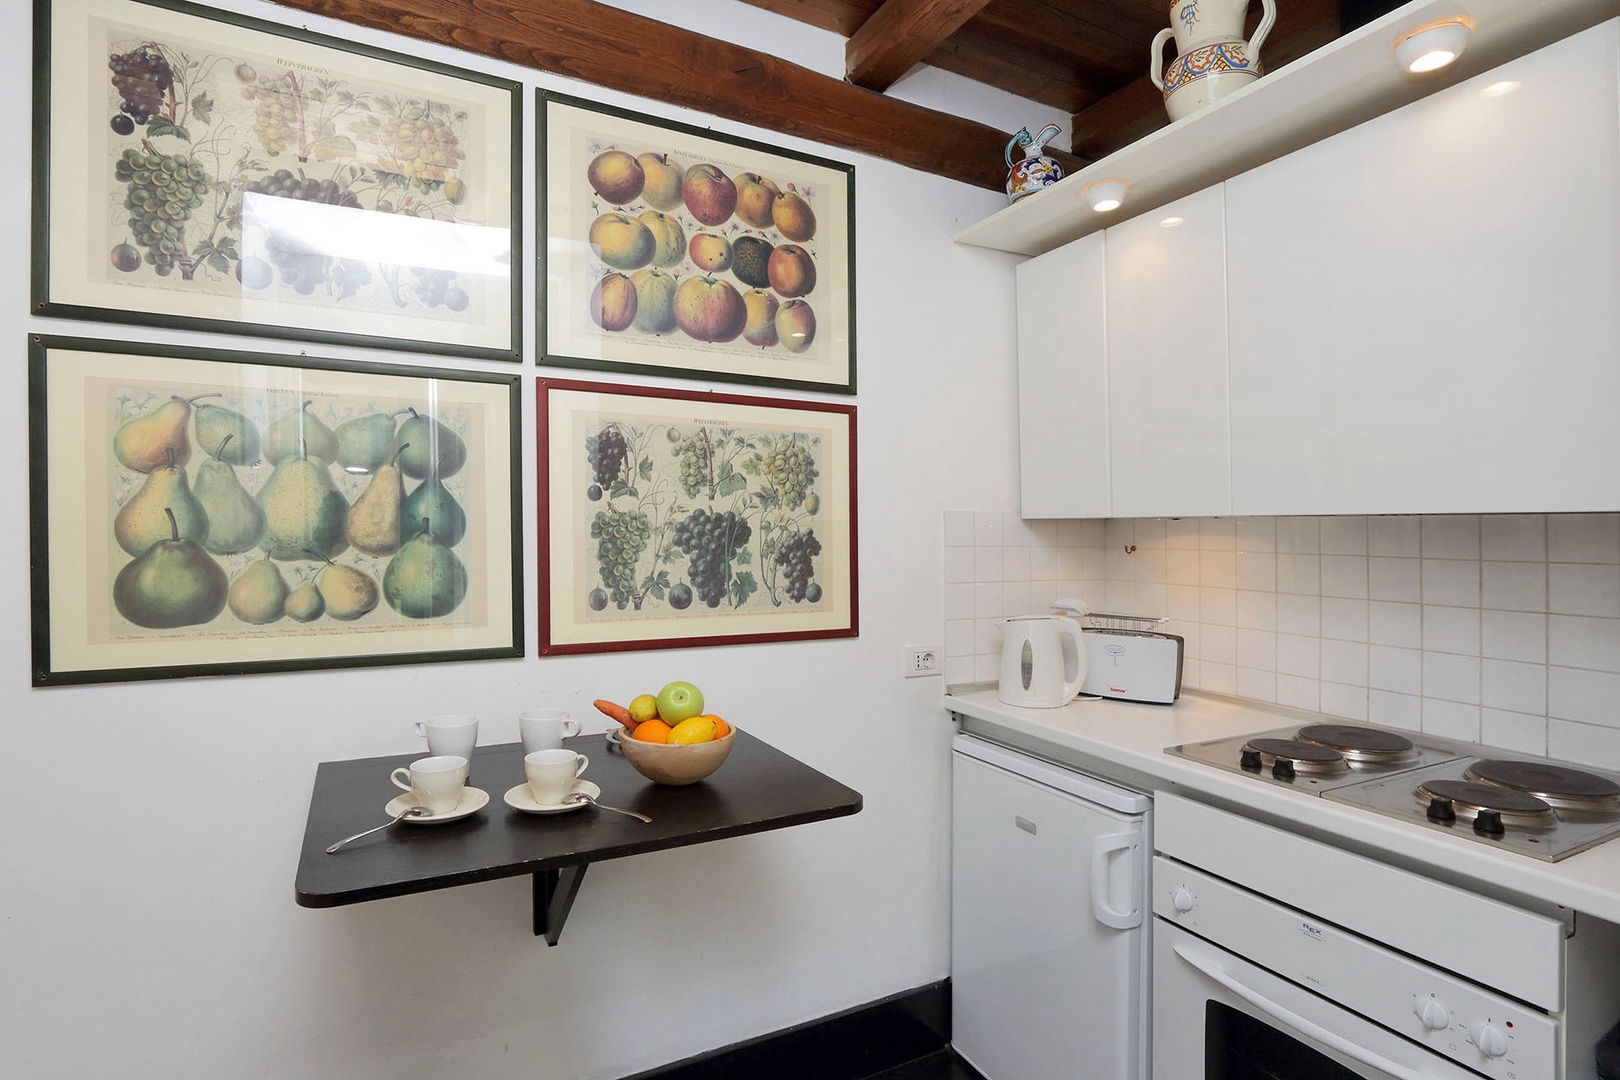 The well-lit, galley style kitchen has the sink and dishwasher with cabinets above on one side.